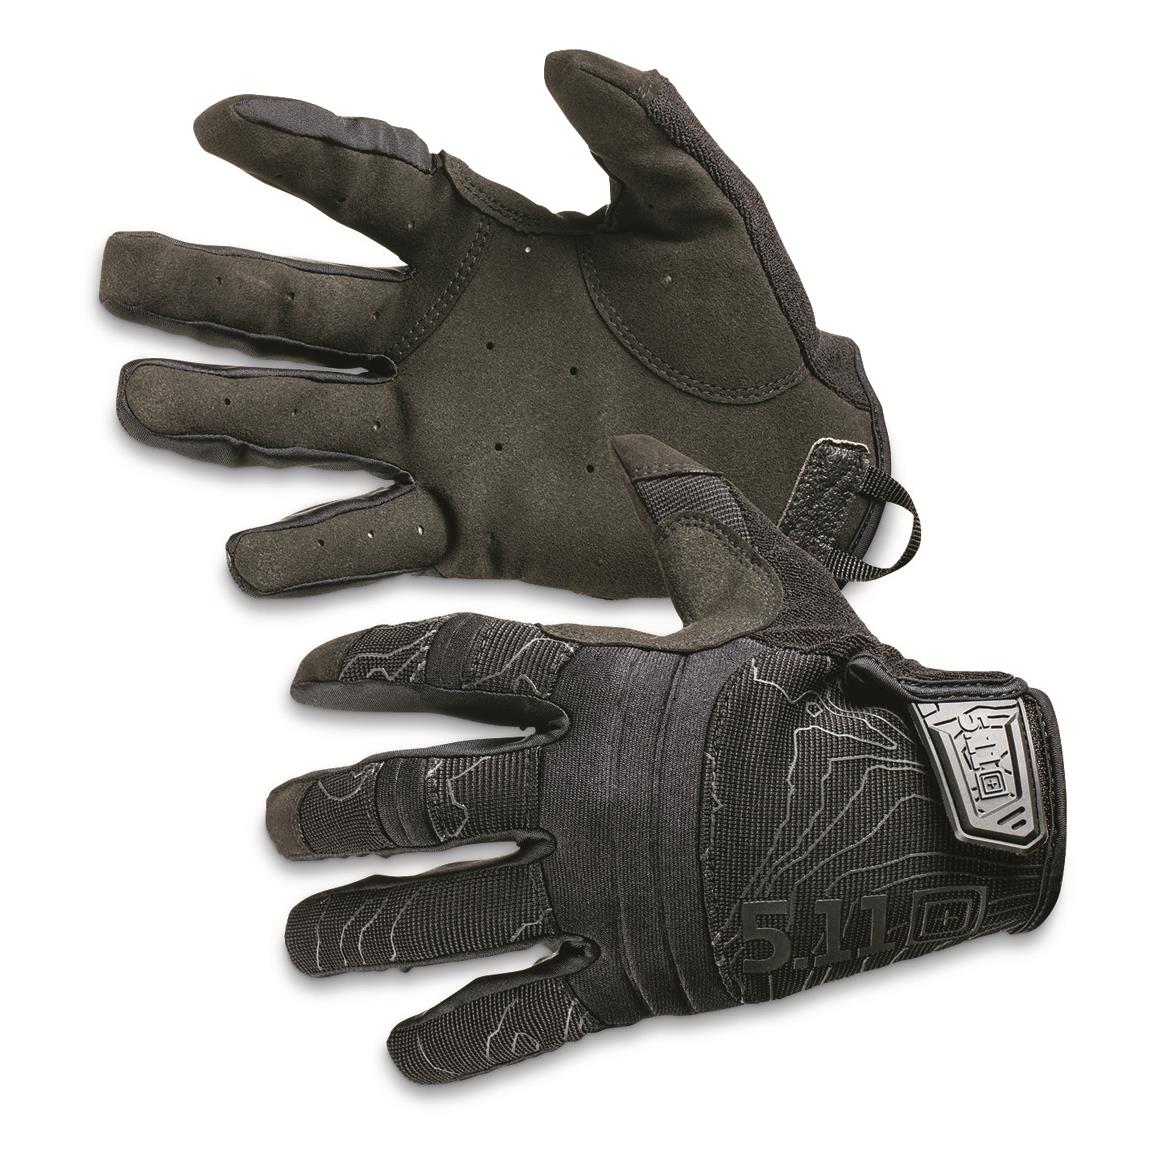 5.11 Tactical Competition Shooting Gloves, Black